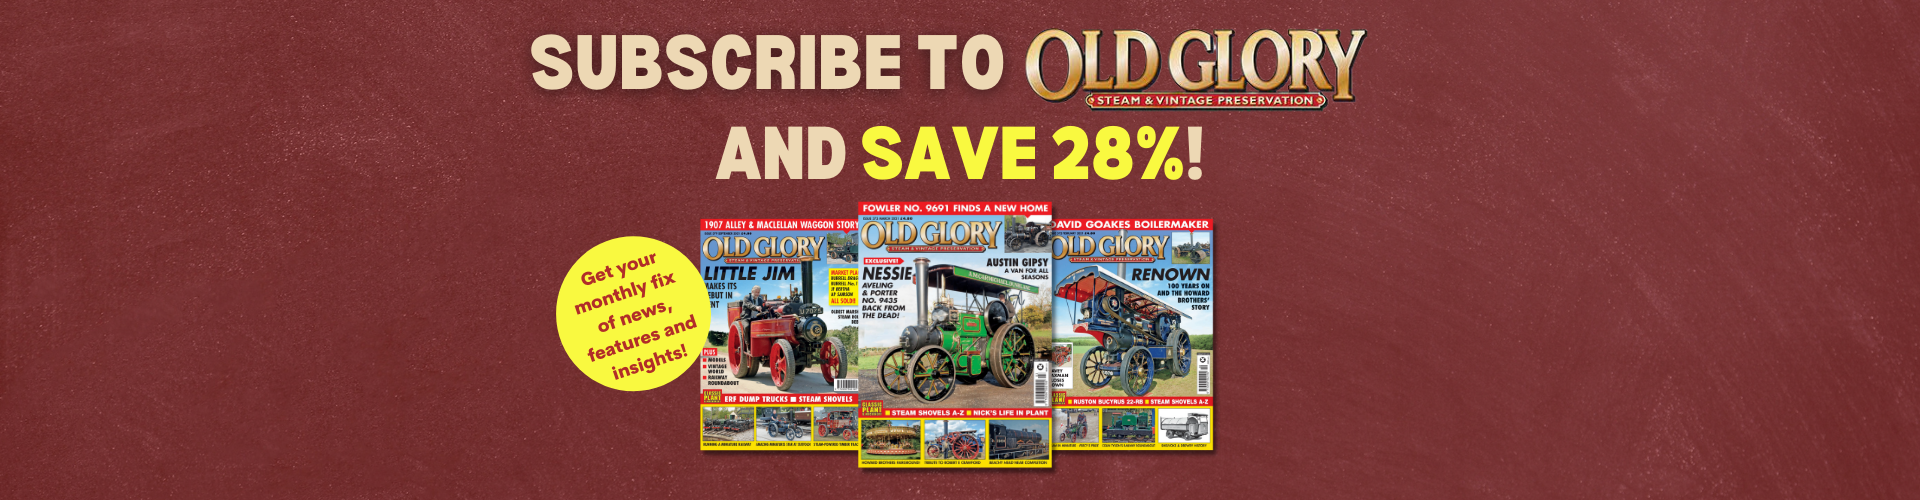 Old Glory - 28% off 1 year